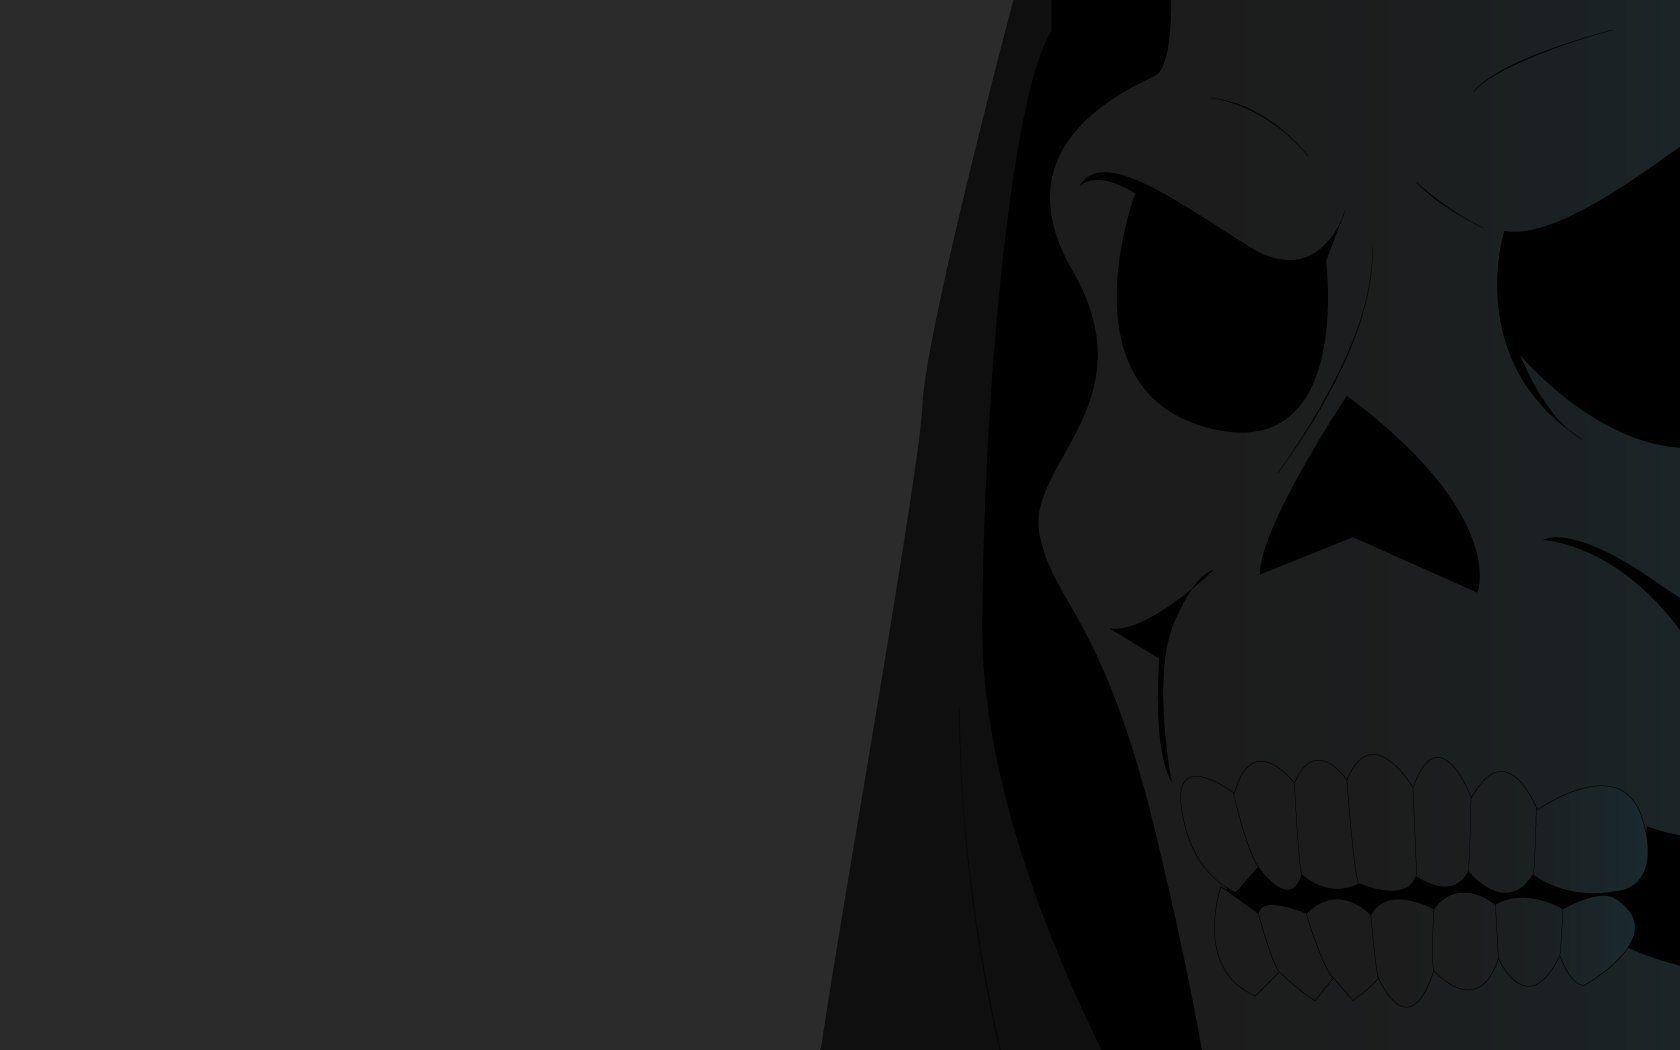 He Man Image Skeletor HD Wallpaper And Background Photo